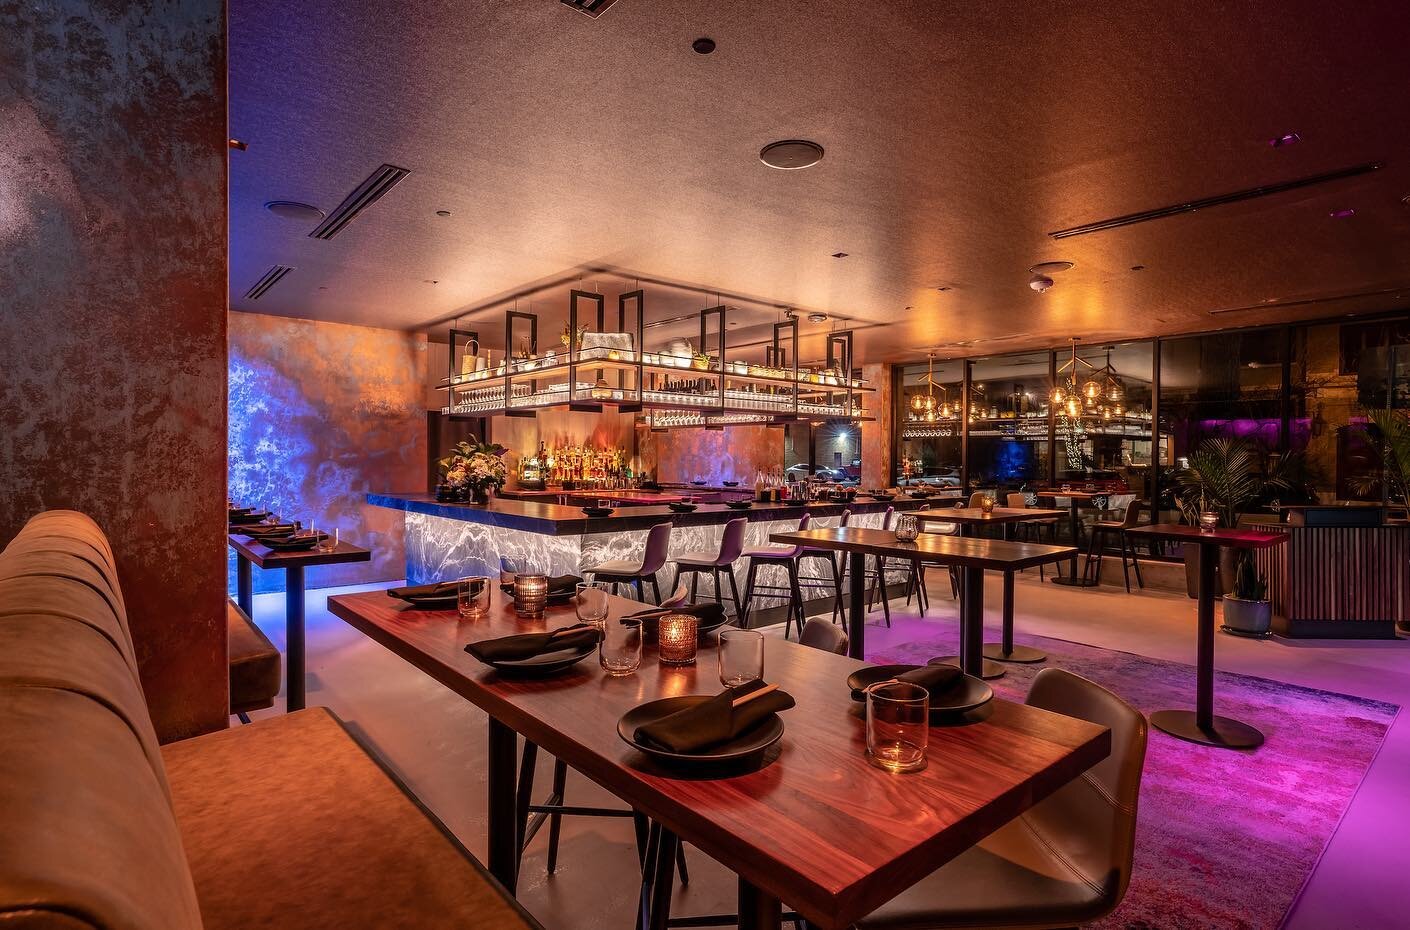 Consensus 2023 is just around the corner!

From meticulous design to the carefully crafted menus, each of our downtown Austin locations provides something exceptional for you and your guests. Join us at any of our 3 venues for your next private event